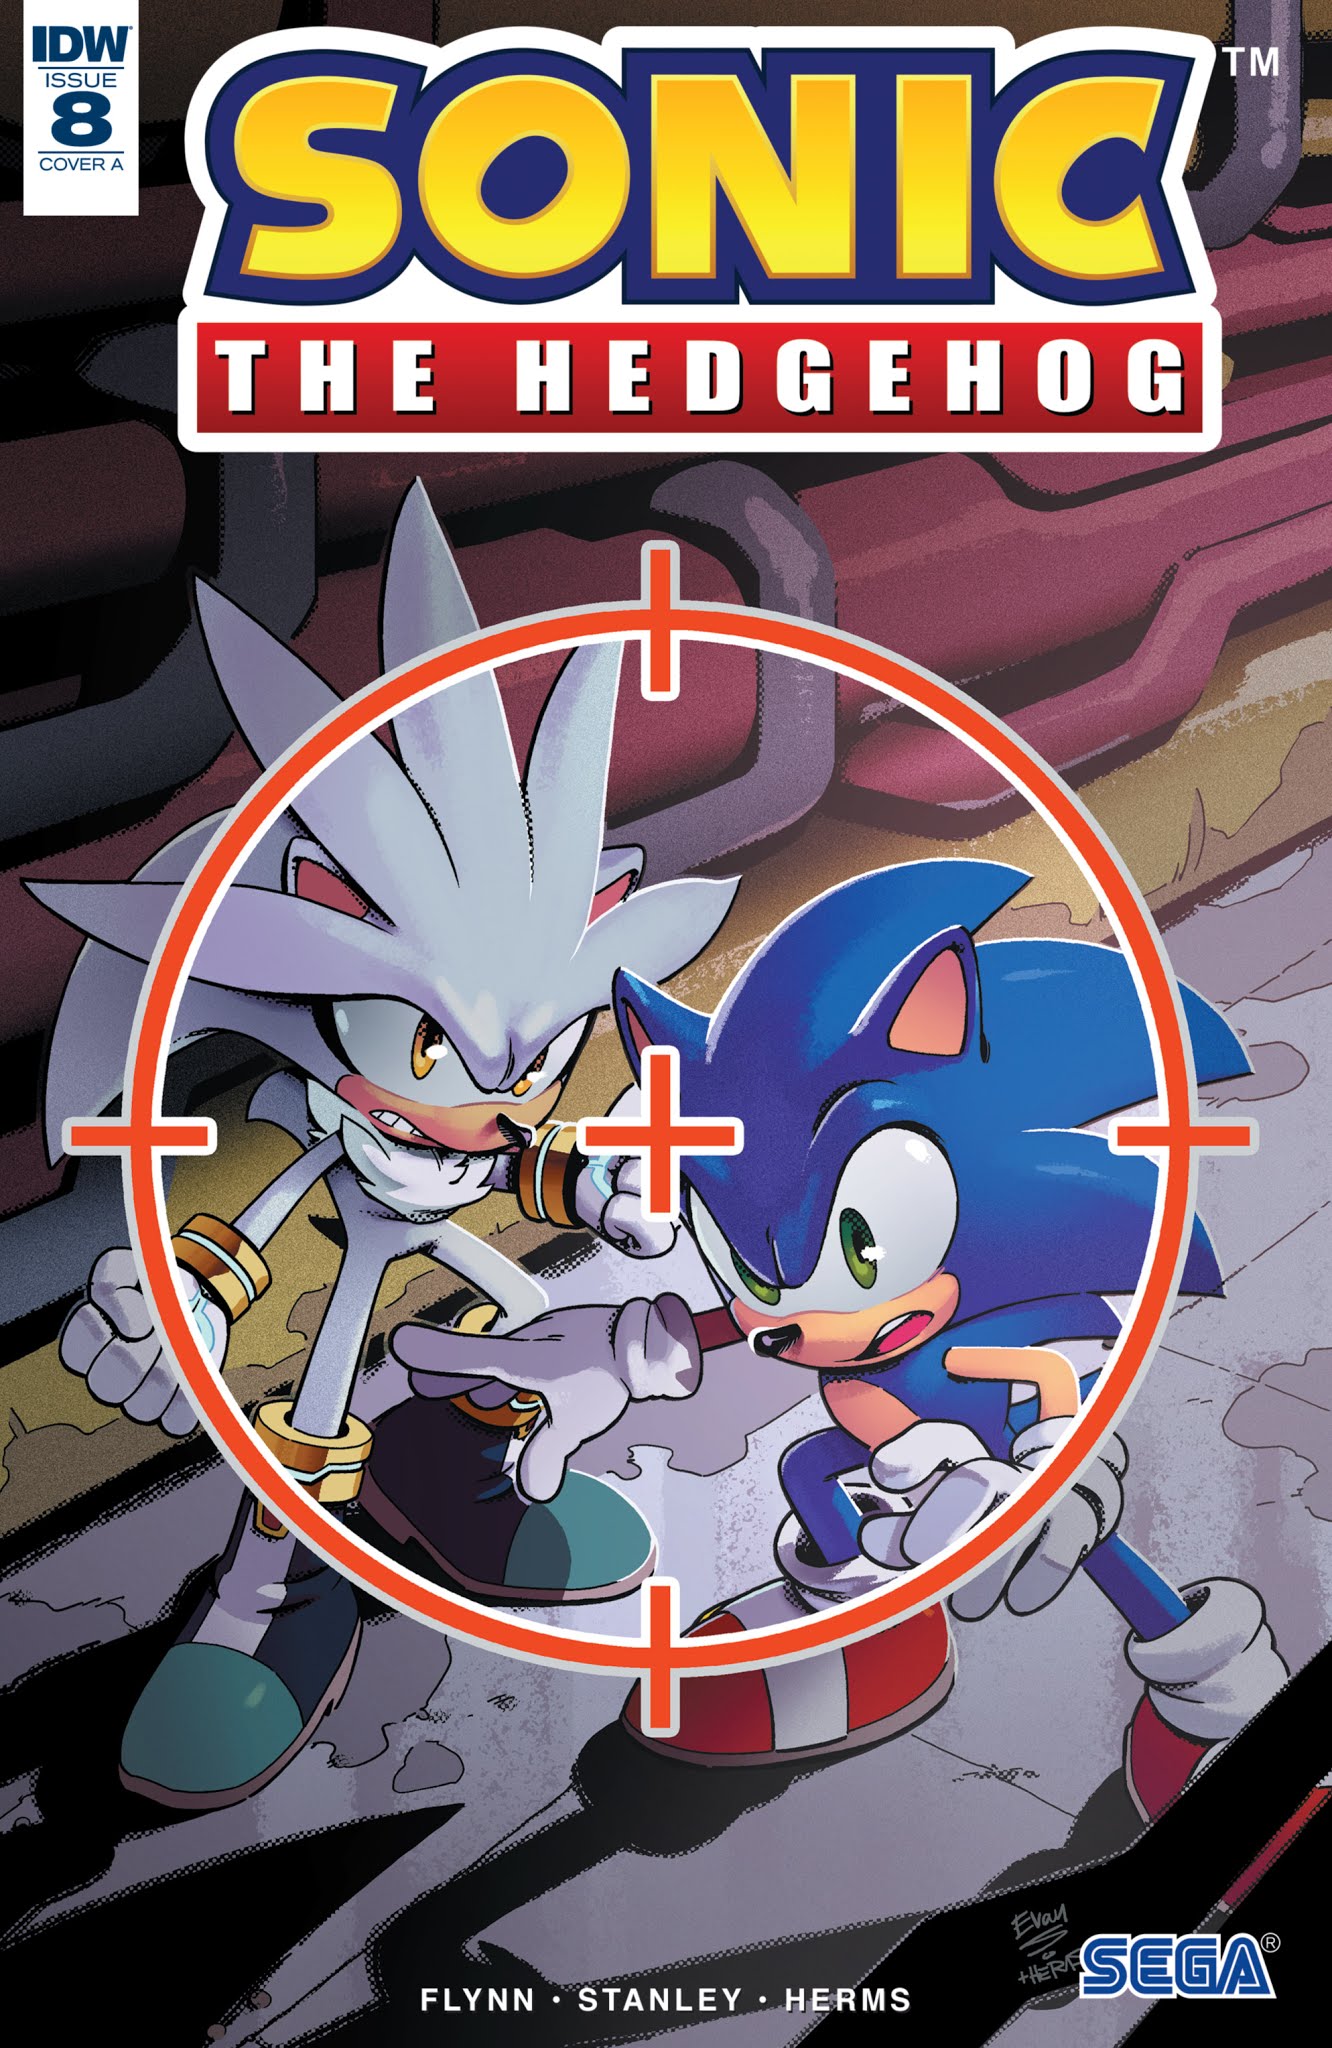 Sonic The Hedgehog 2018 Issue 8 | Read Sonic The Hedgehog 2018 Issue 8 comic  online in high quality. Read Full Comic online for free - Read comics online  in high quality .|viewcomiconline.com